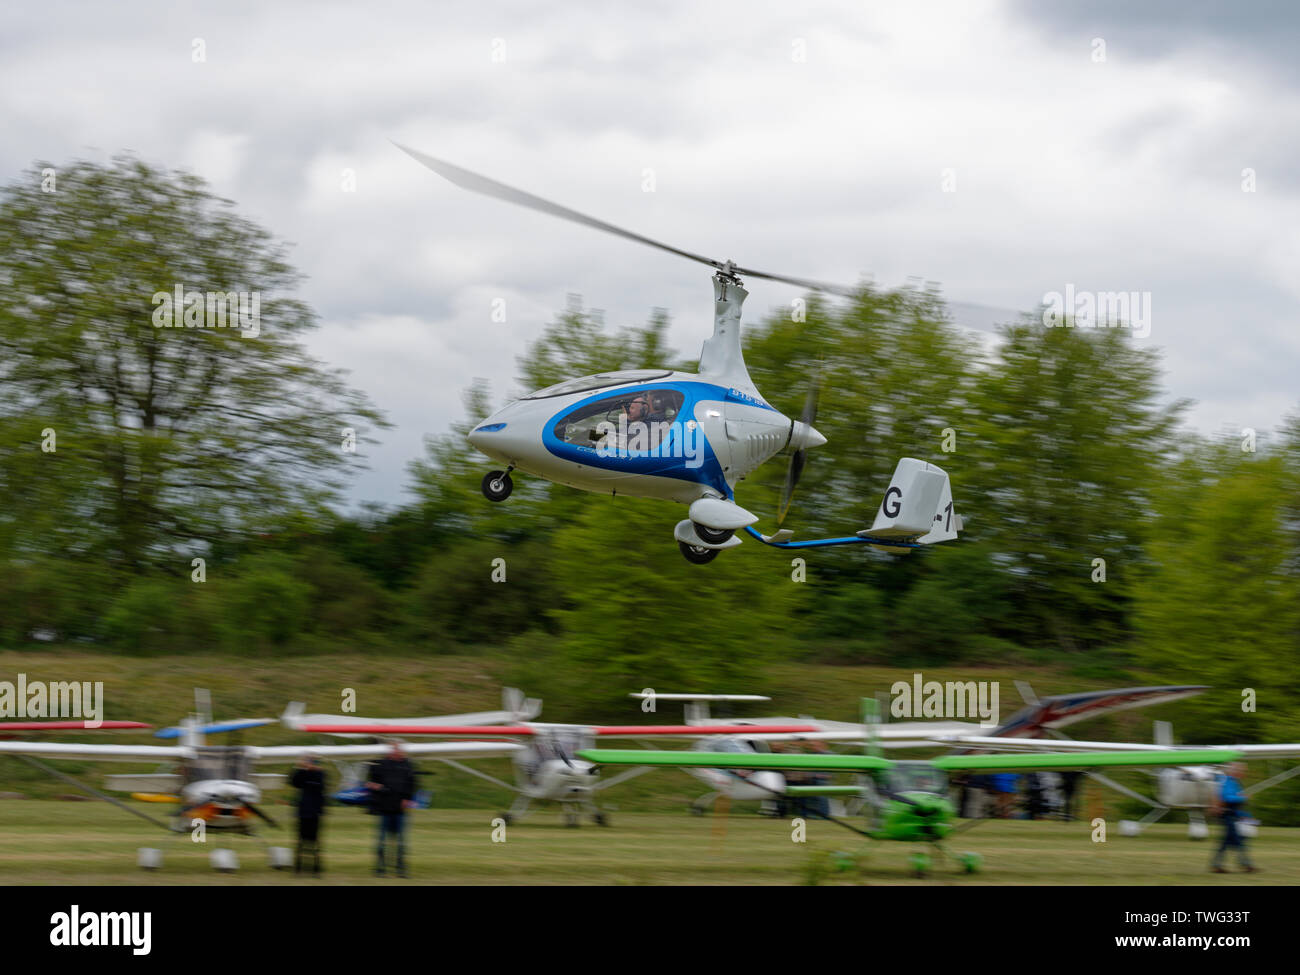 Rotorsport Cavalon Autogyro rotary aircraft takes off from Popham airfield in Hampshire Stock Photo